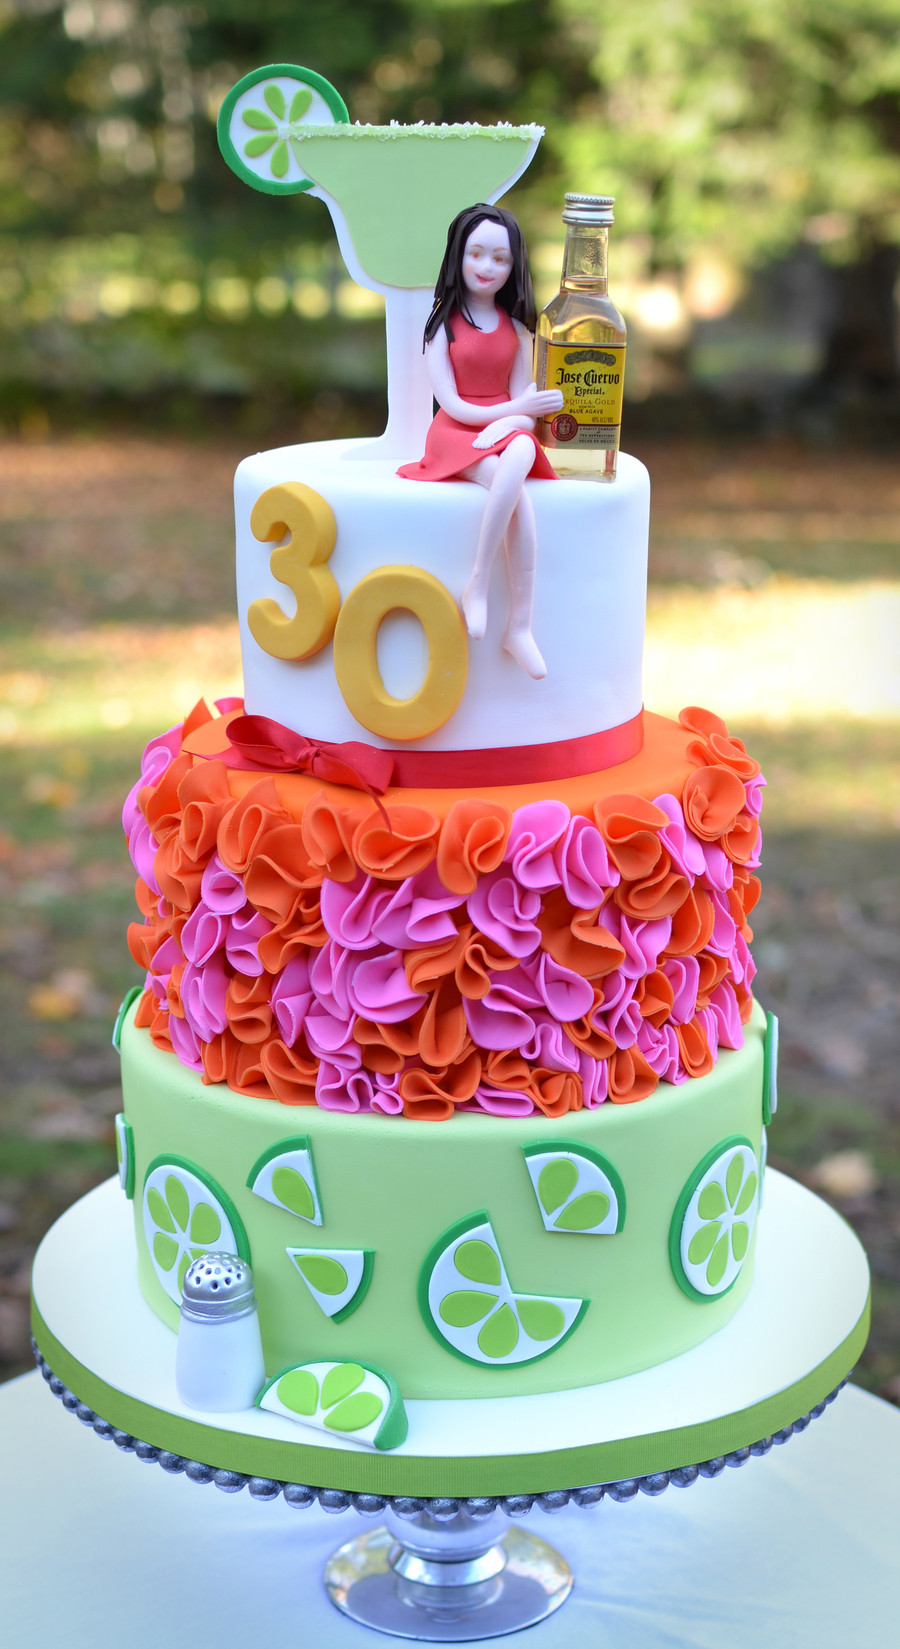 Birthday Cake For Her
 Margarita And Tequila Themed 30Th Birthday Cake